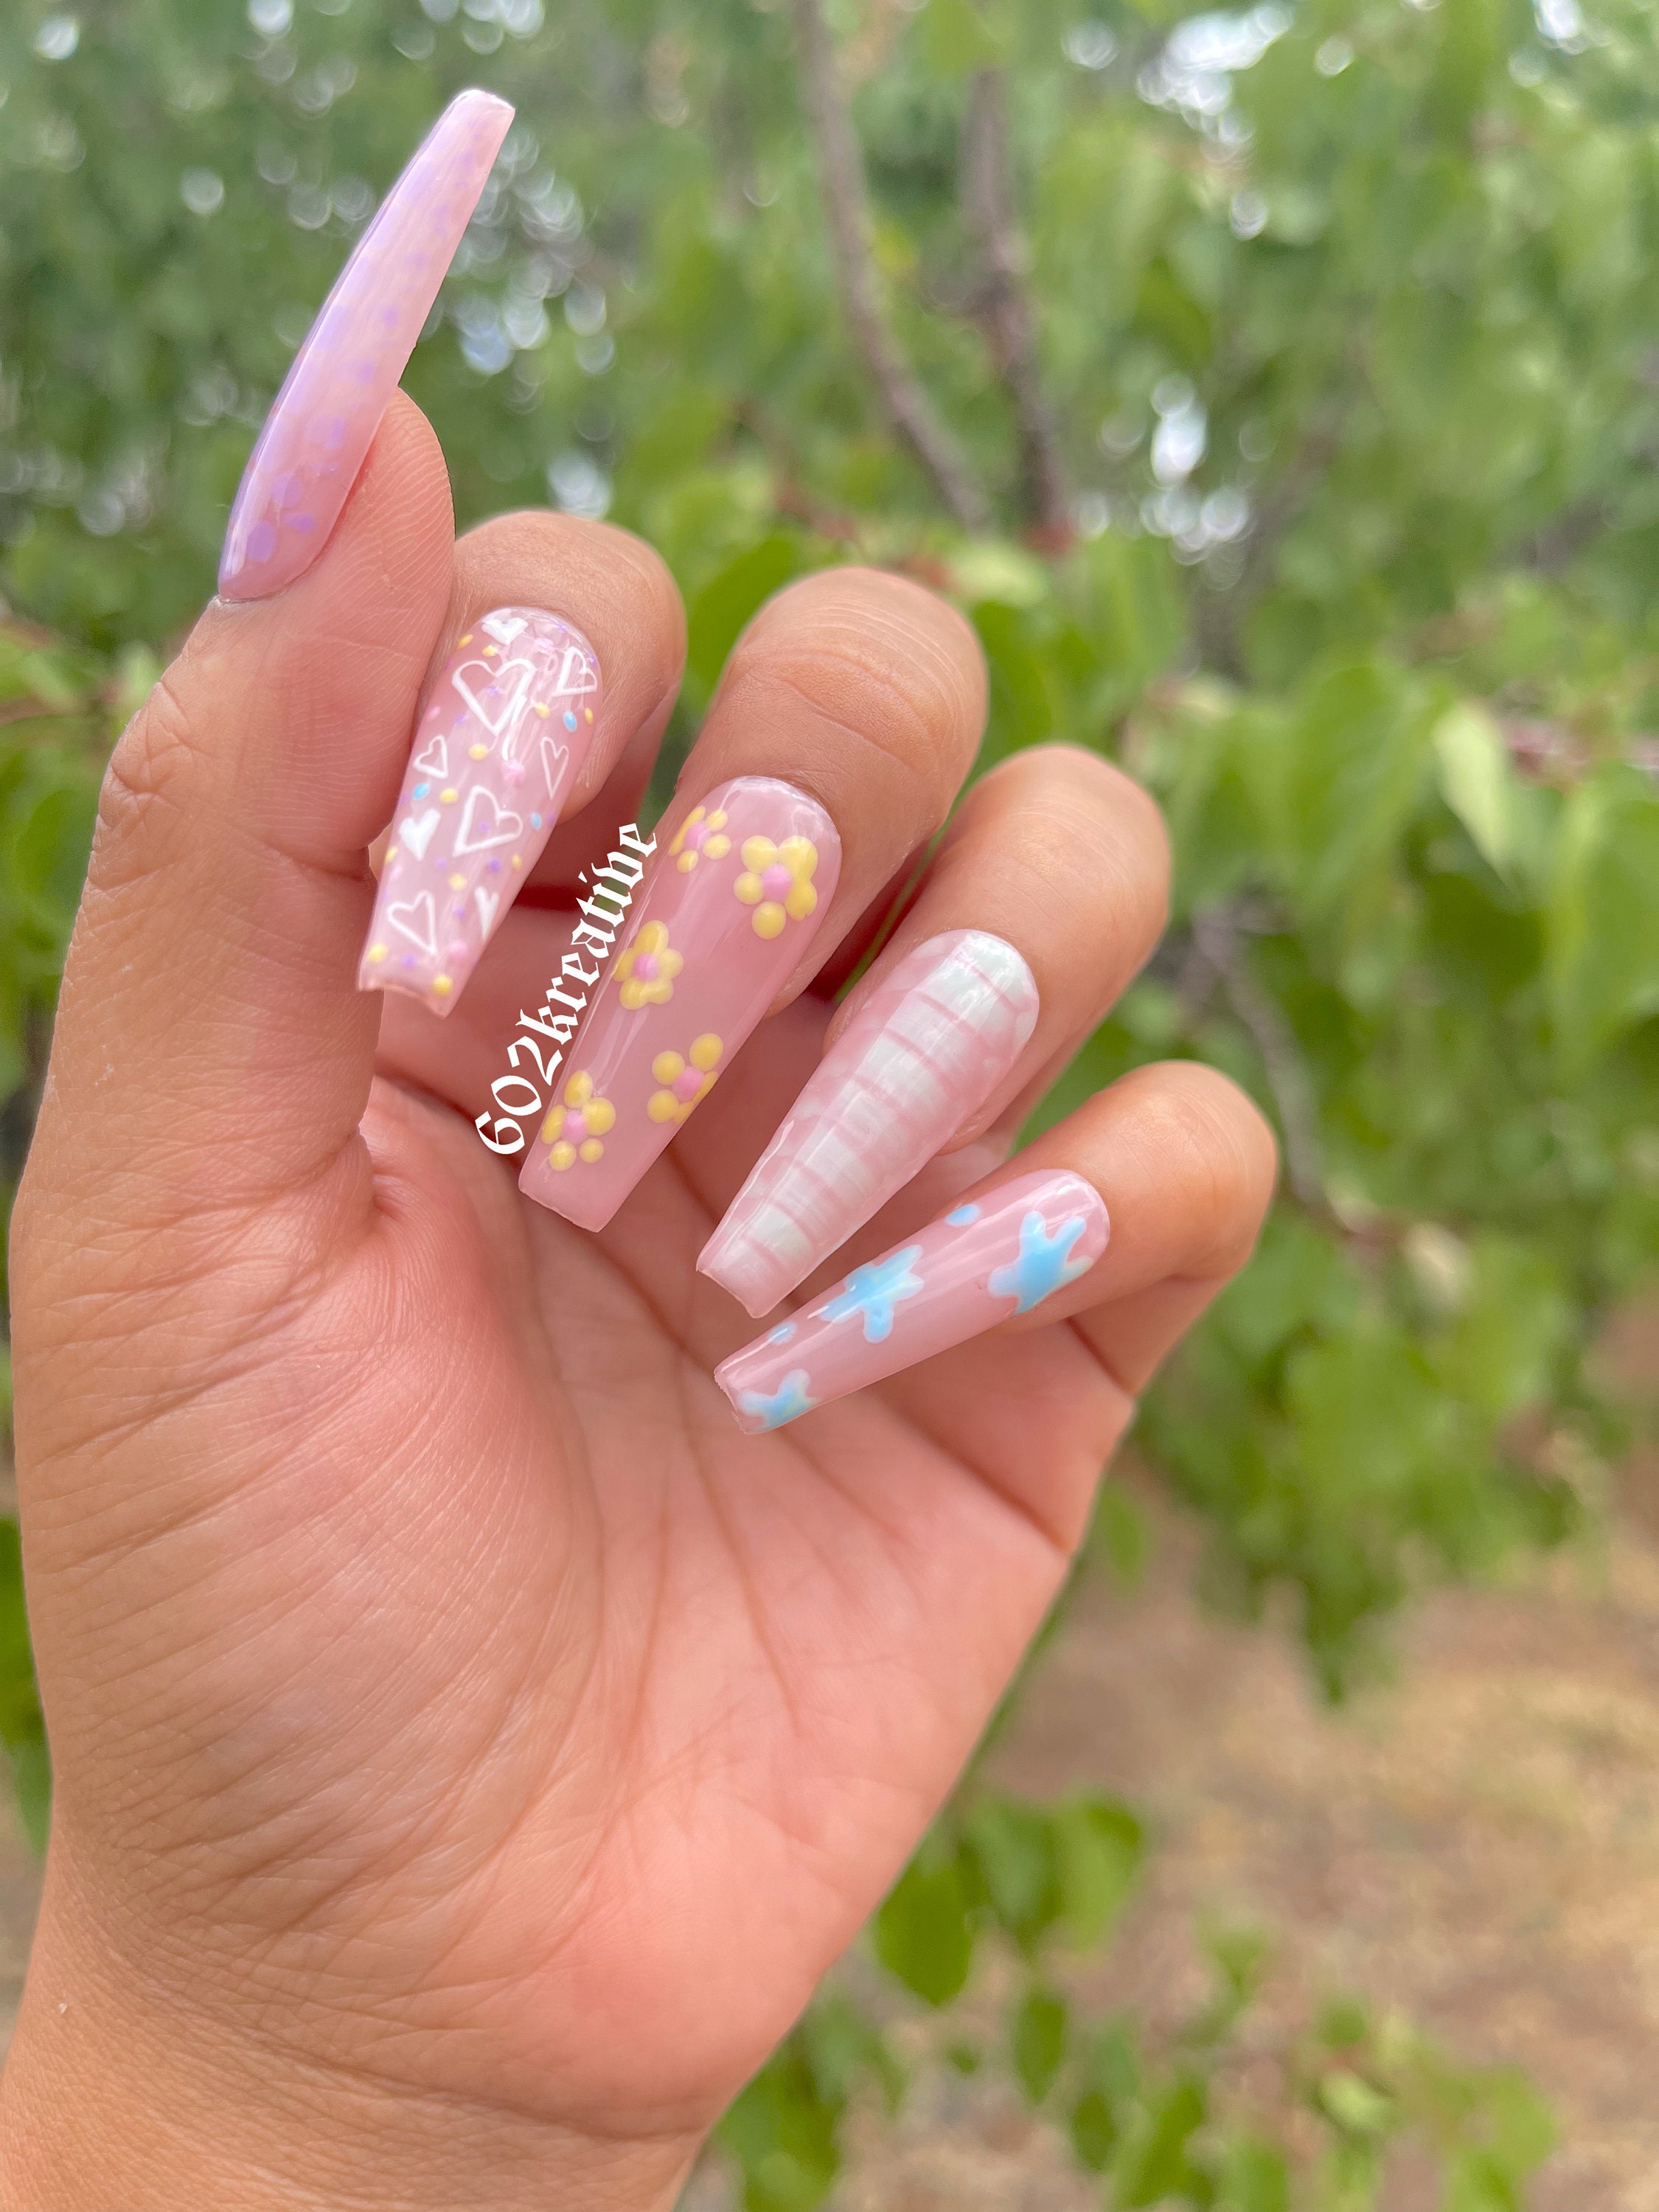 Louis Vuitton nails!! My first time using nail stickers : r/Nails